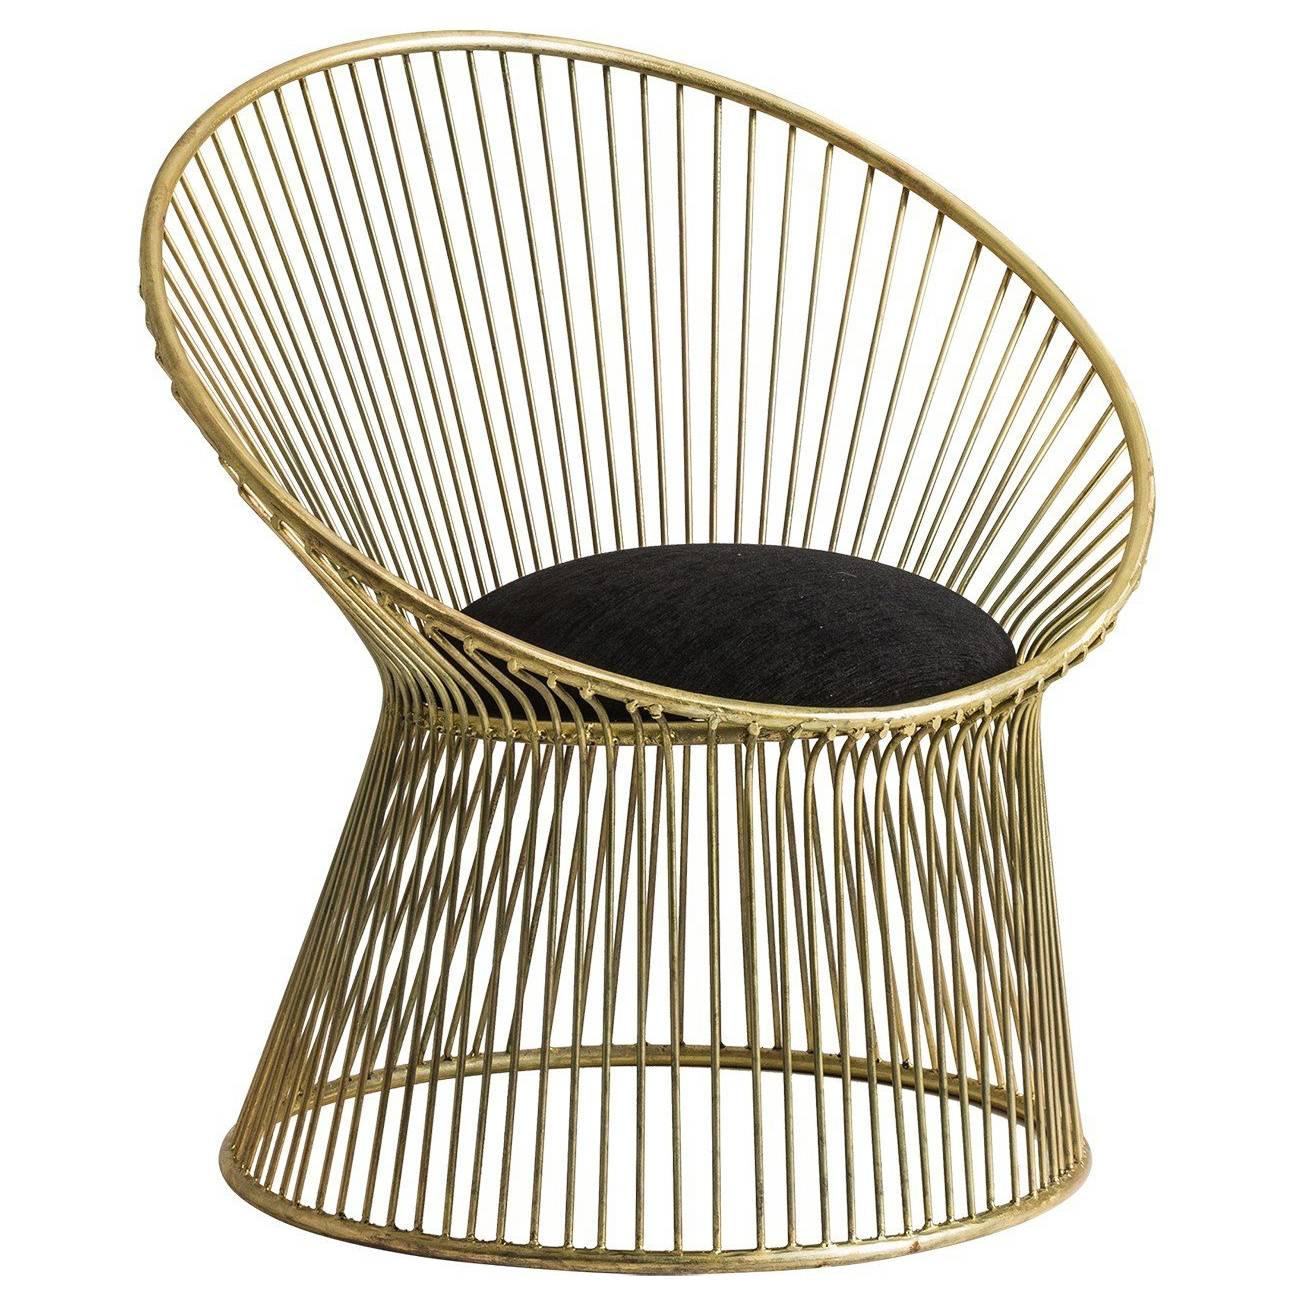 Armchair in steel wires